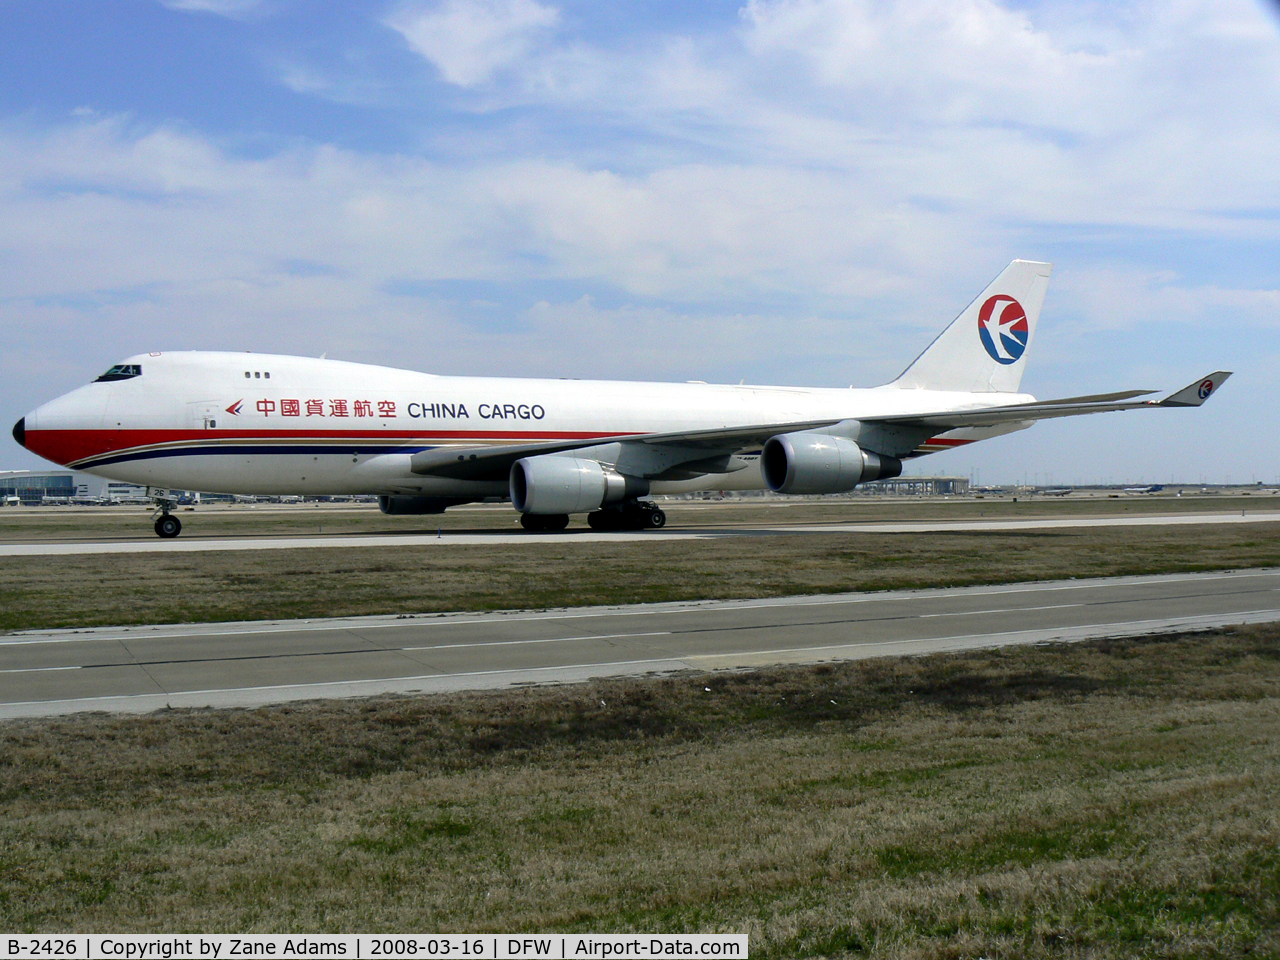 B-2426, 2007 Boeing 747-40BF/ER/SCD C/N 35208/1392, China Cargo on the taxiway at DFW